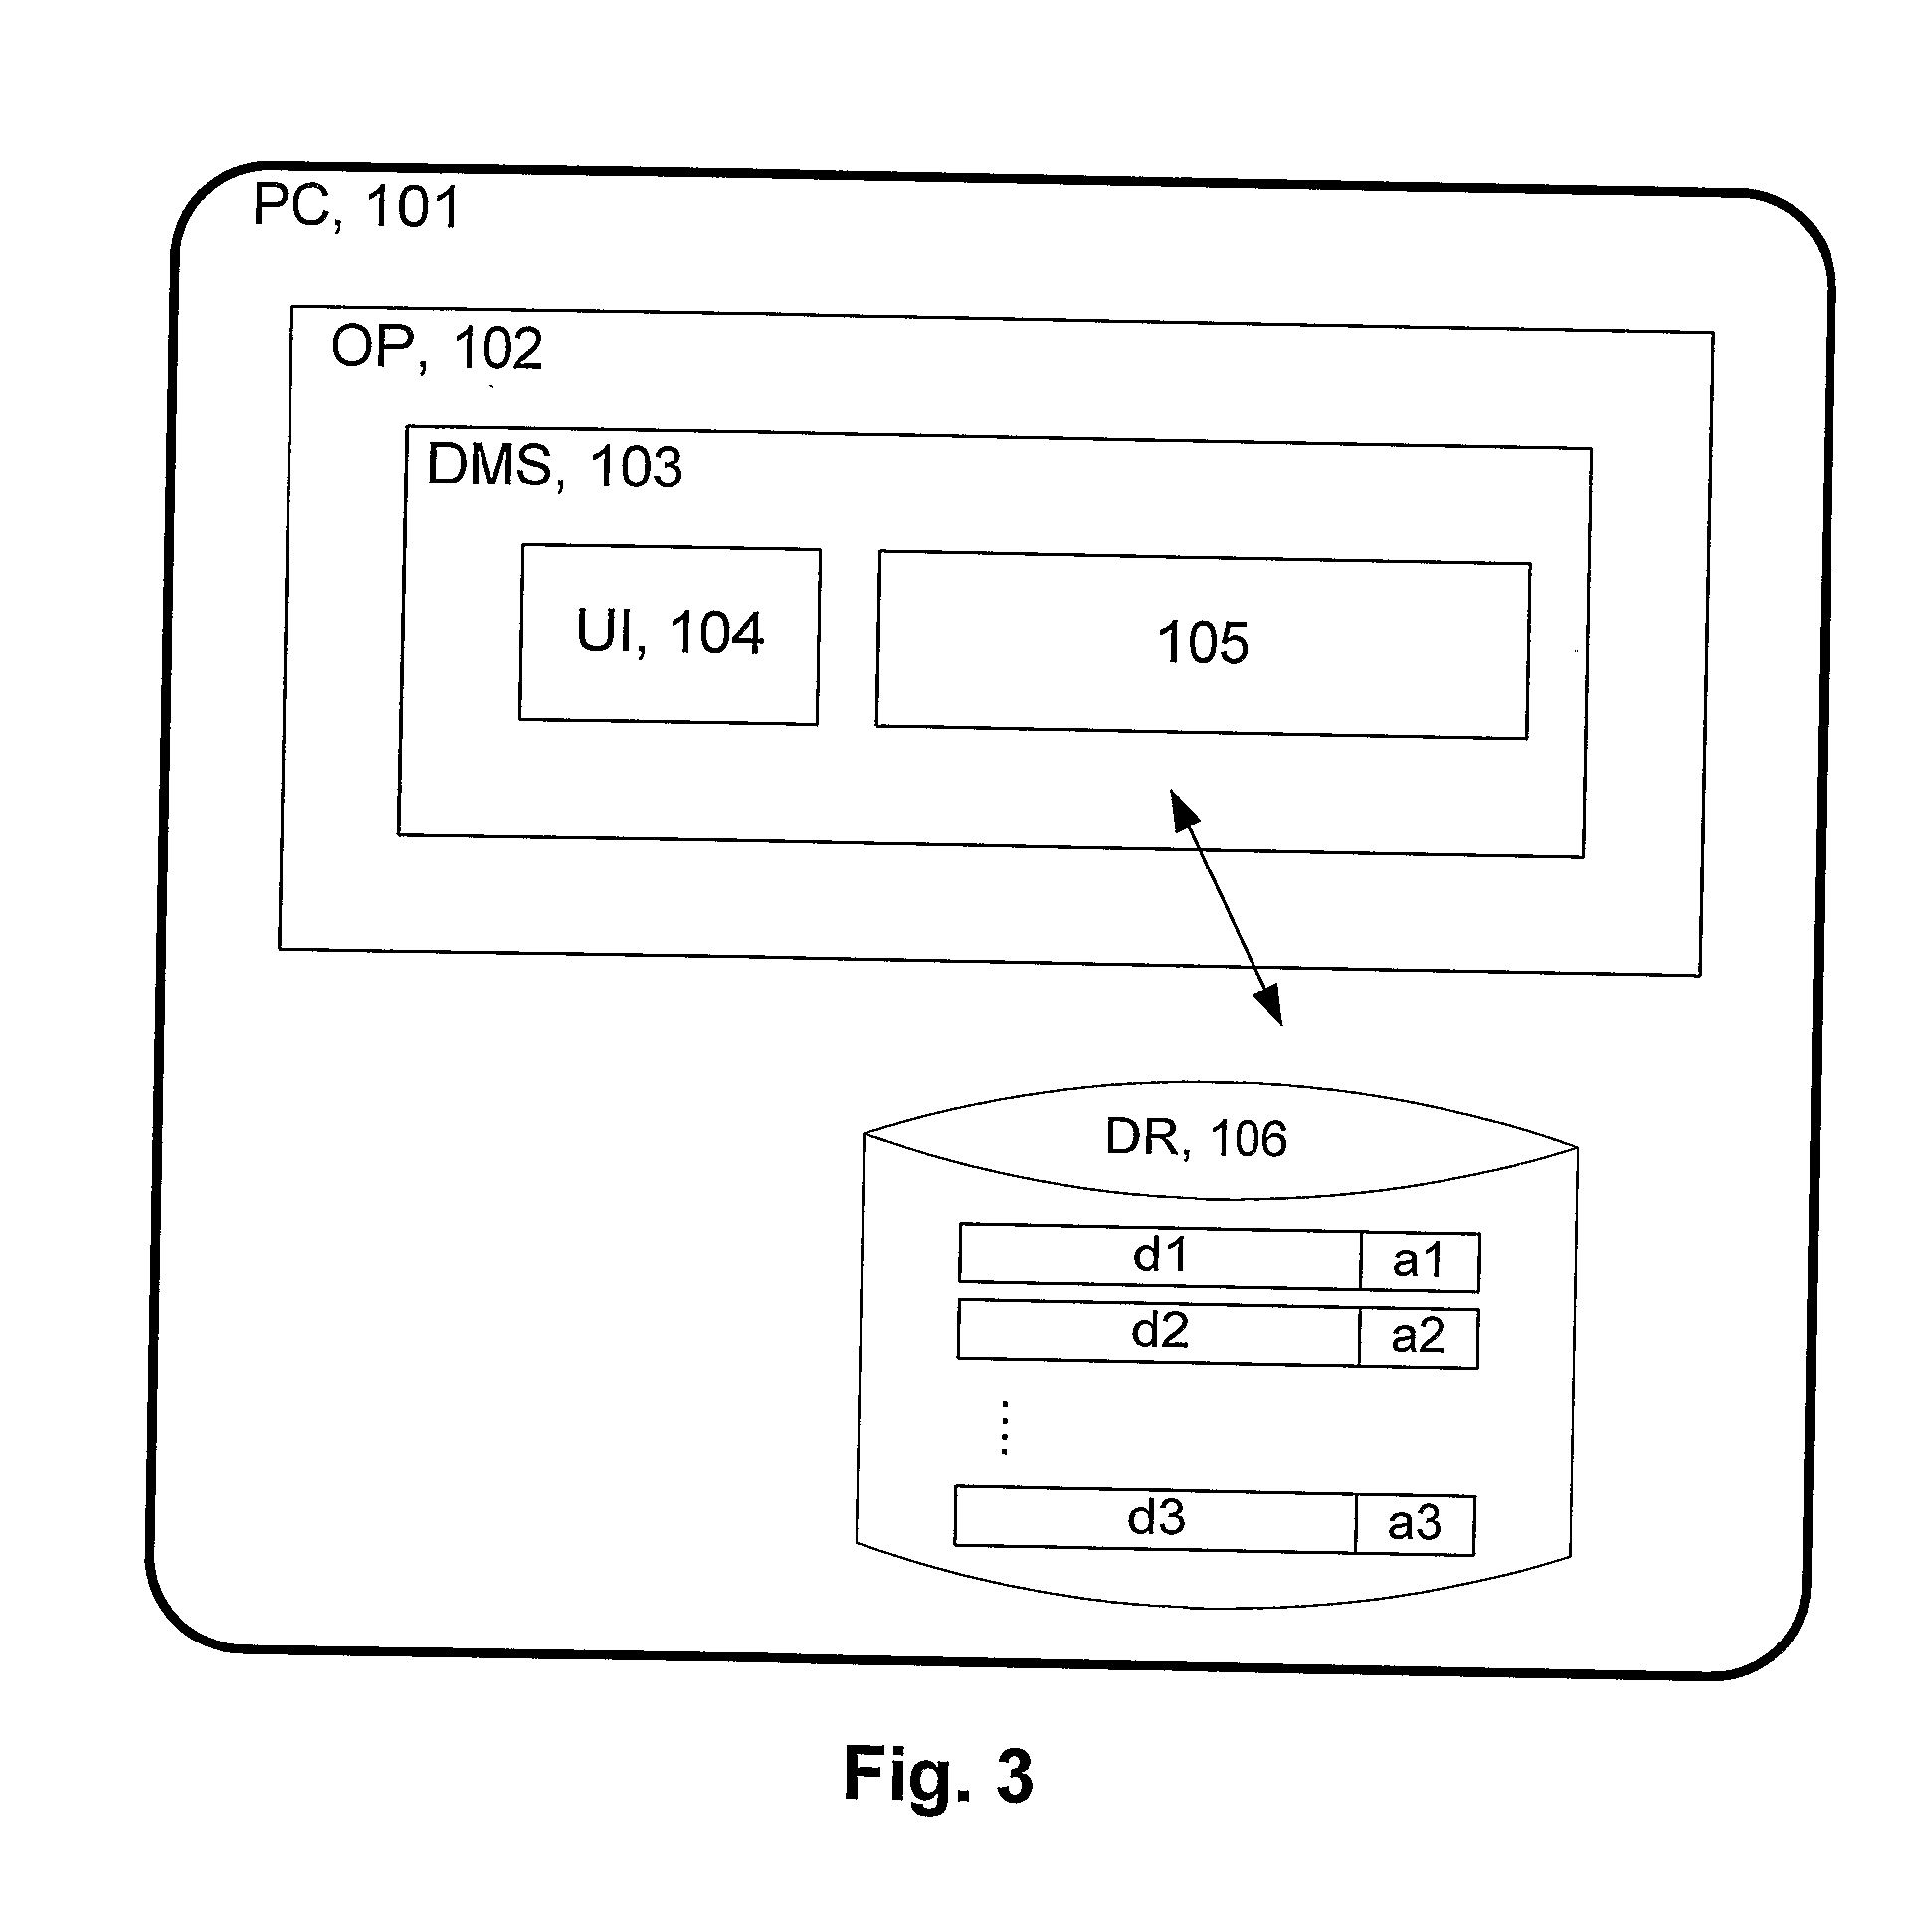 Management of Document Attributes in a Document Managing System